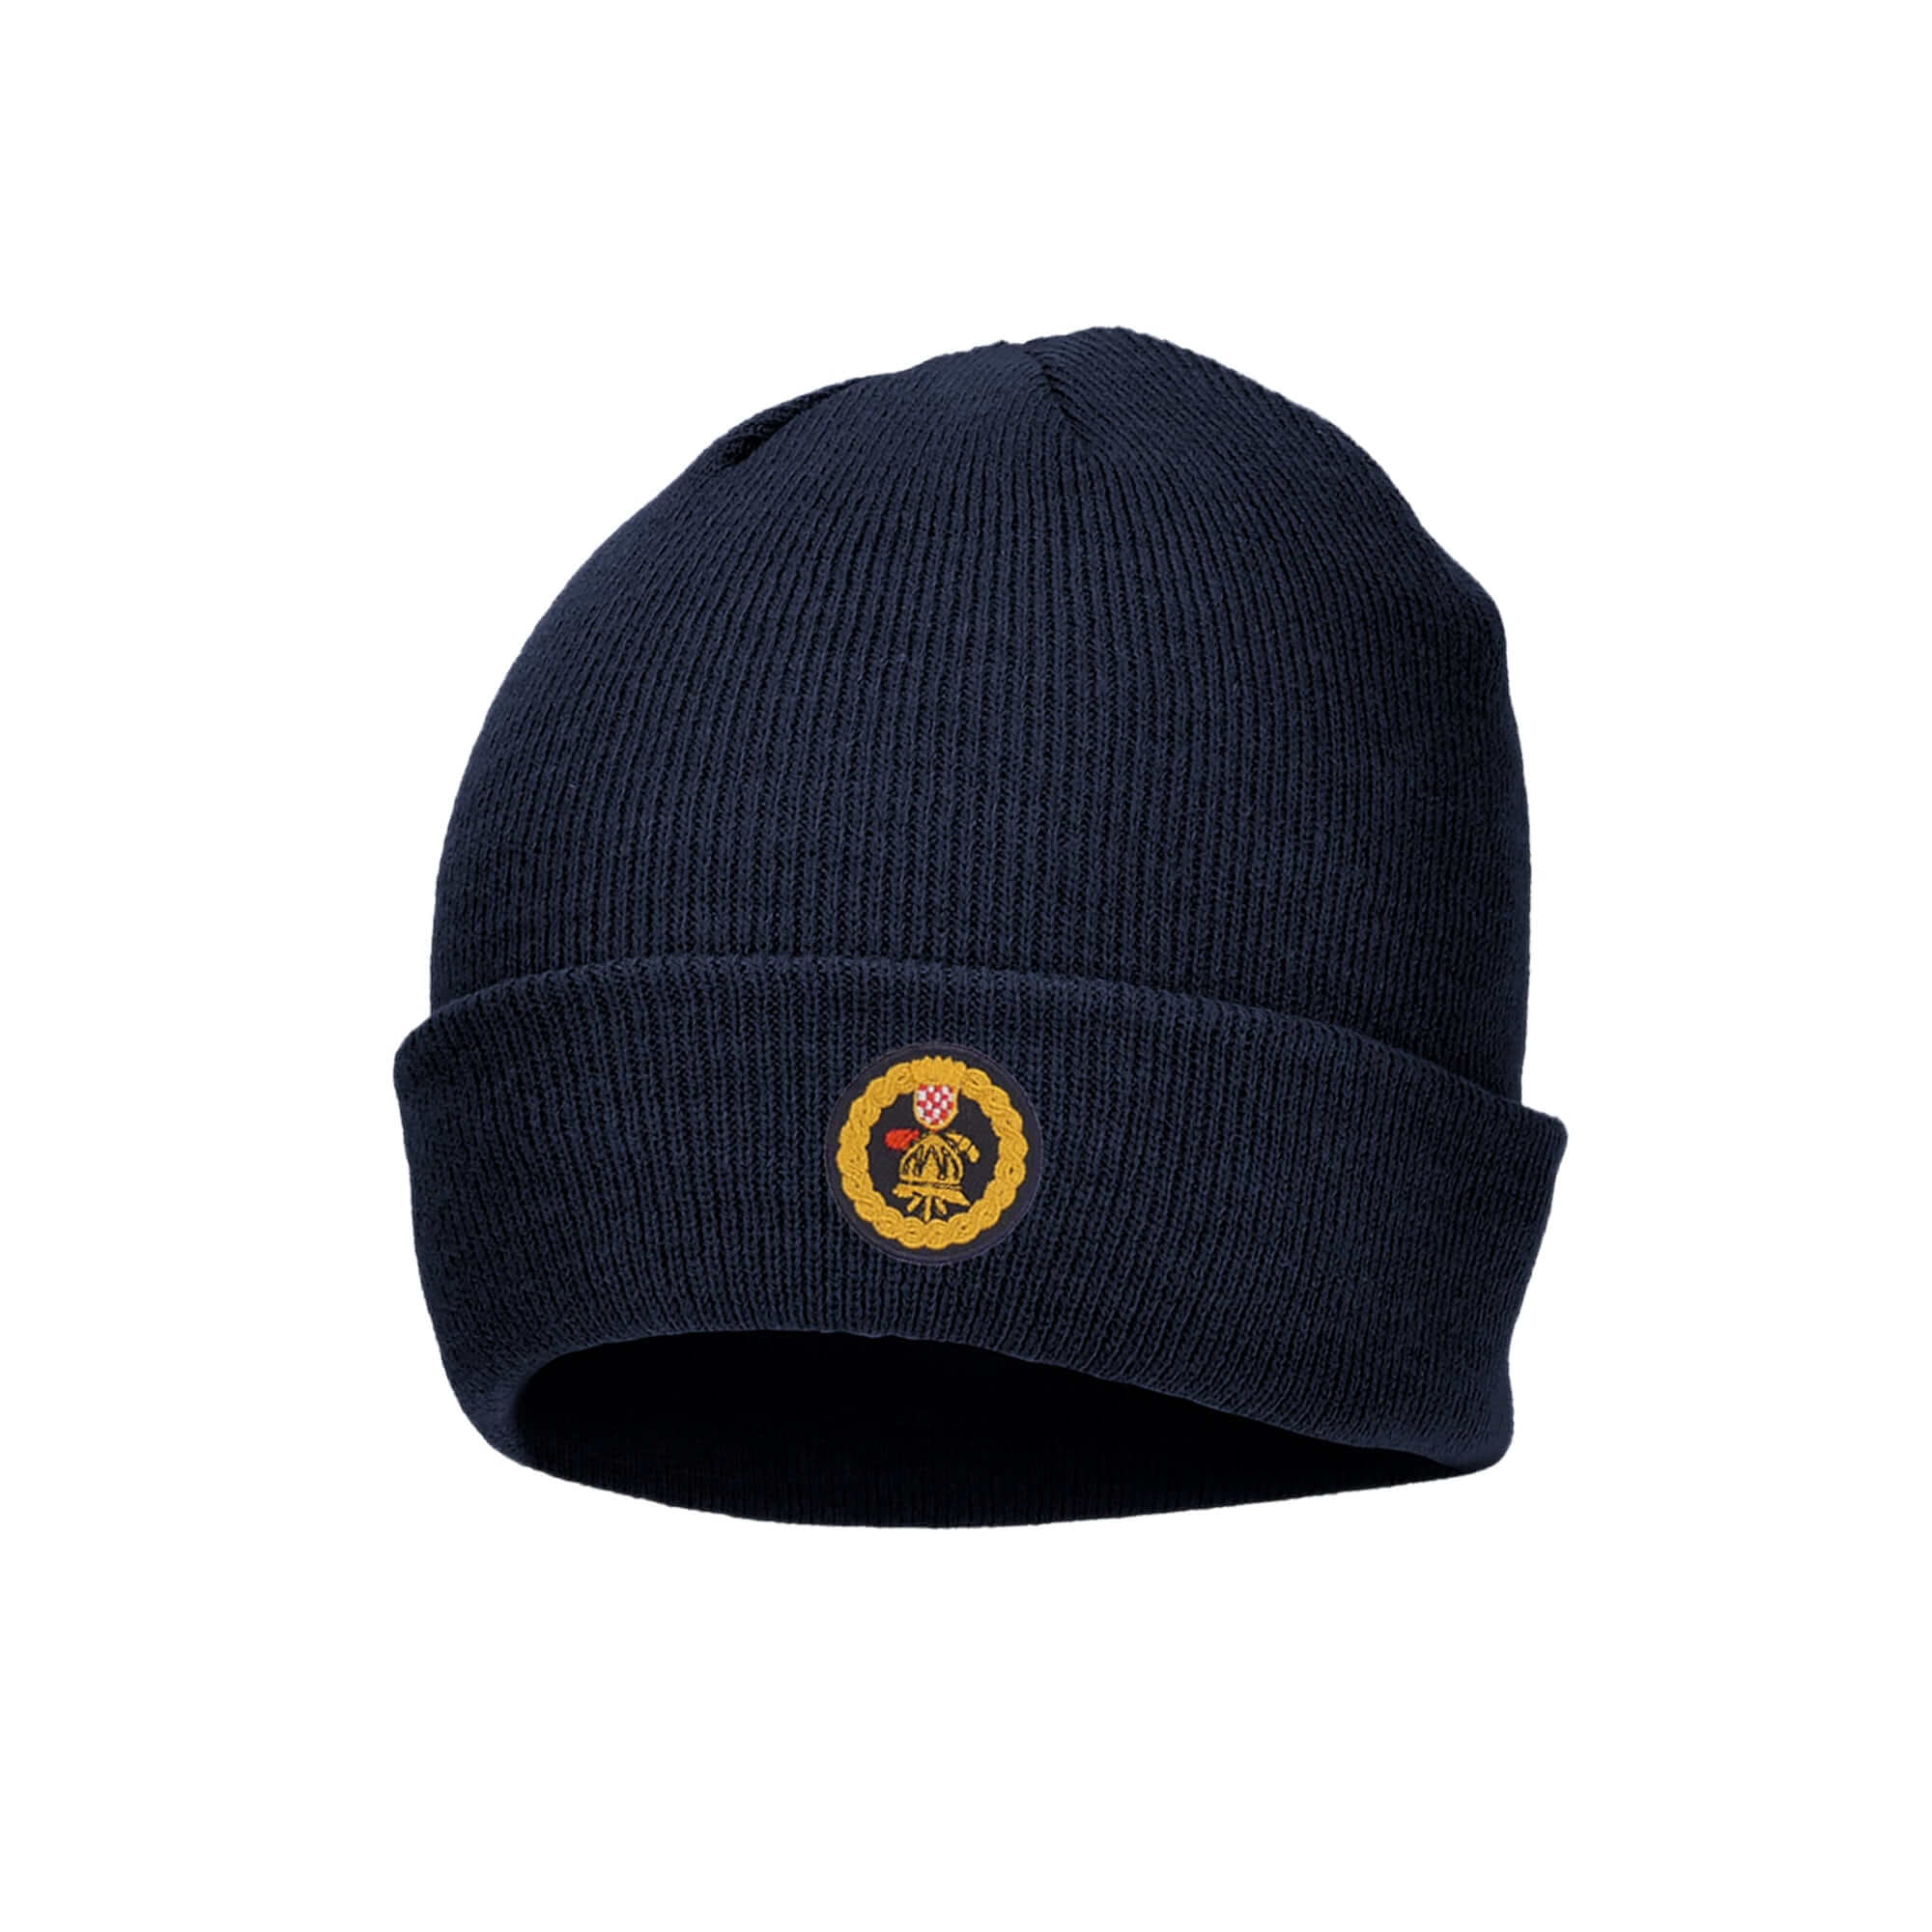 Double wool cap with fire emblem